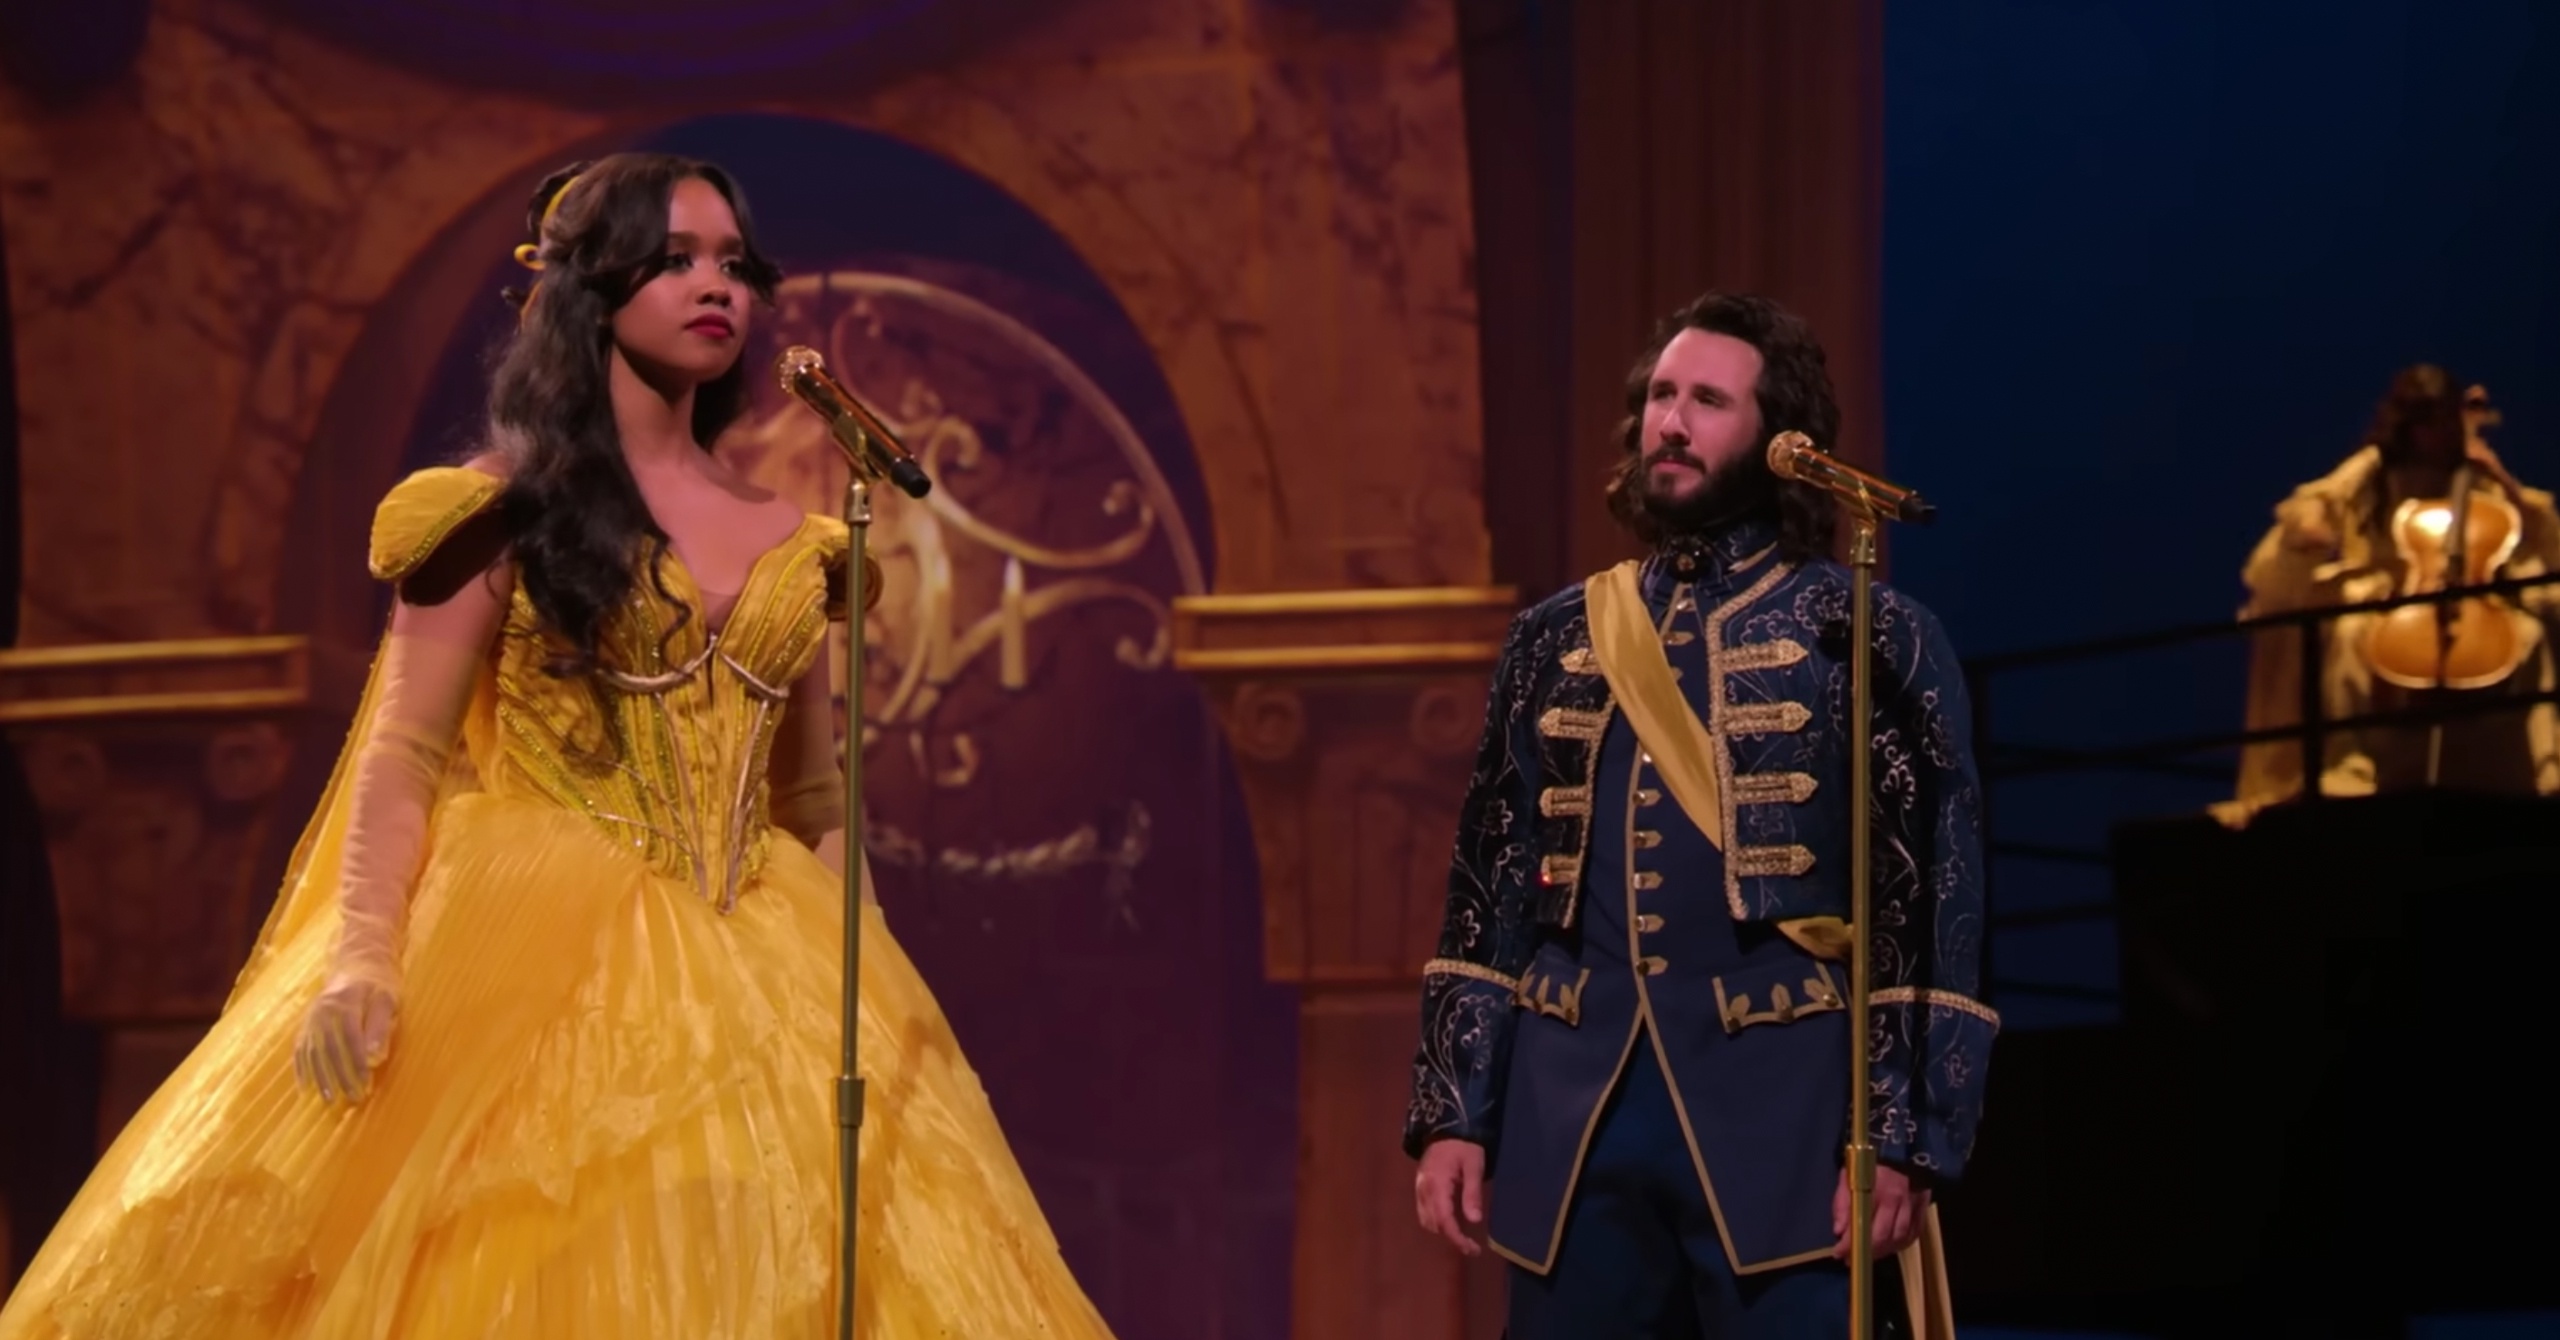 The Story Behind H.E.R.’s Dresses in “Beauty And The Beast” featured image